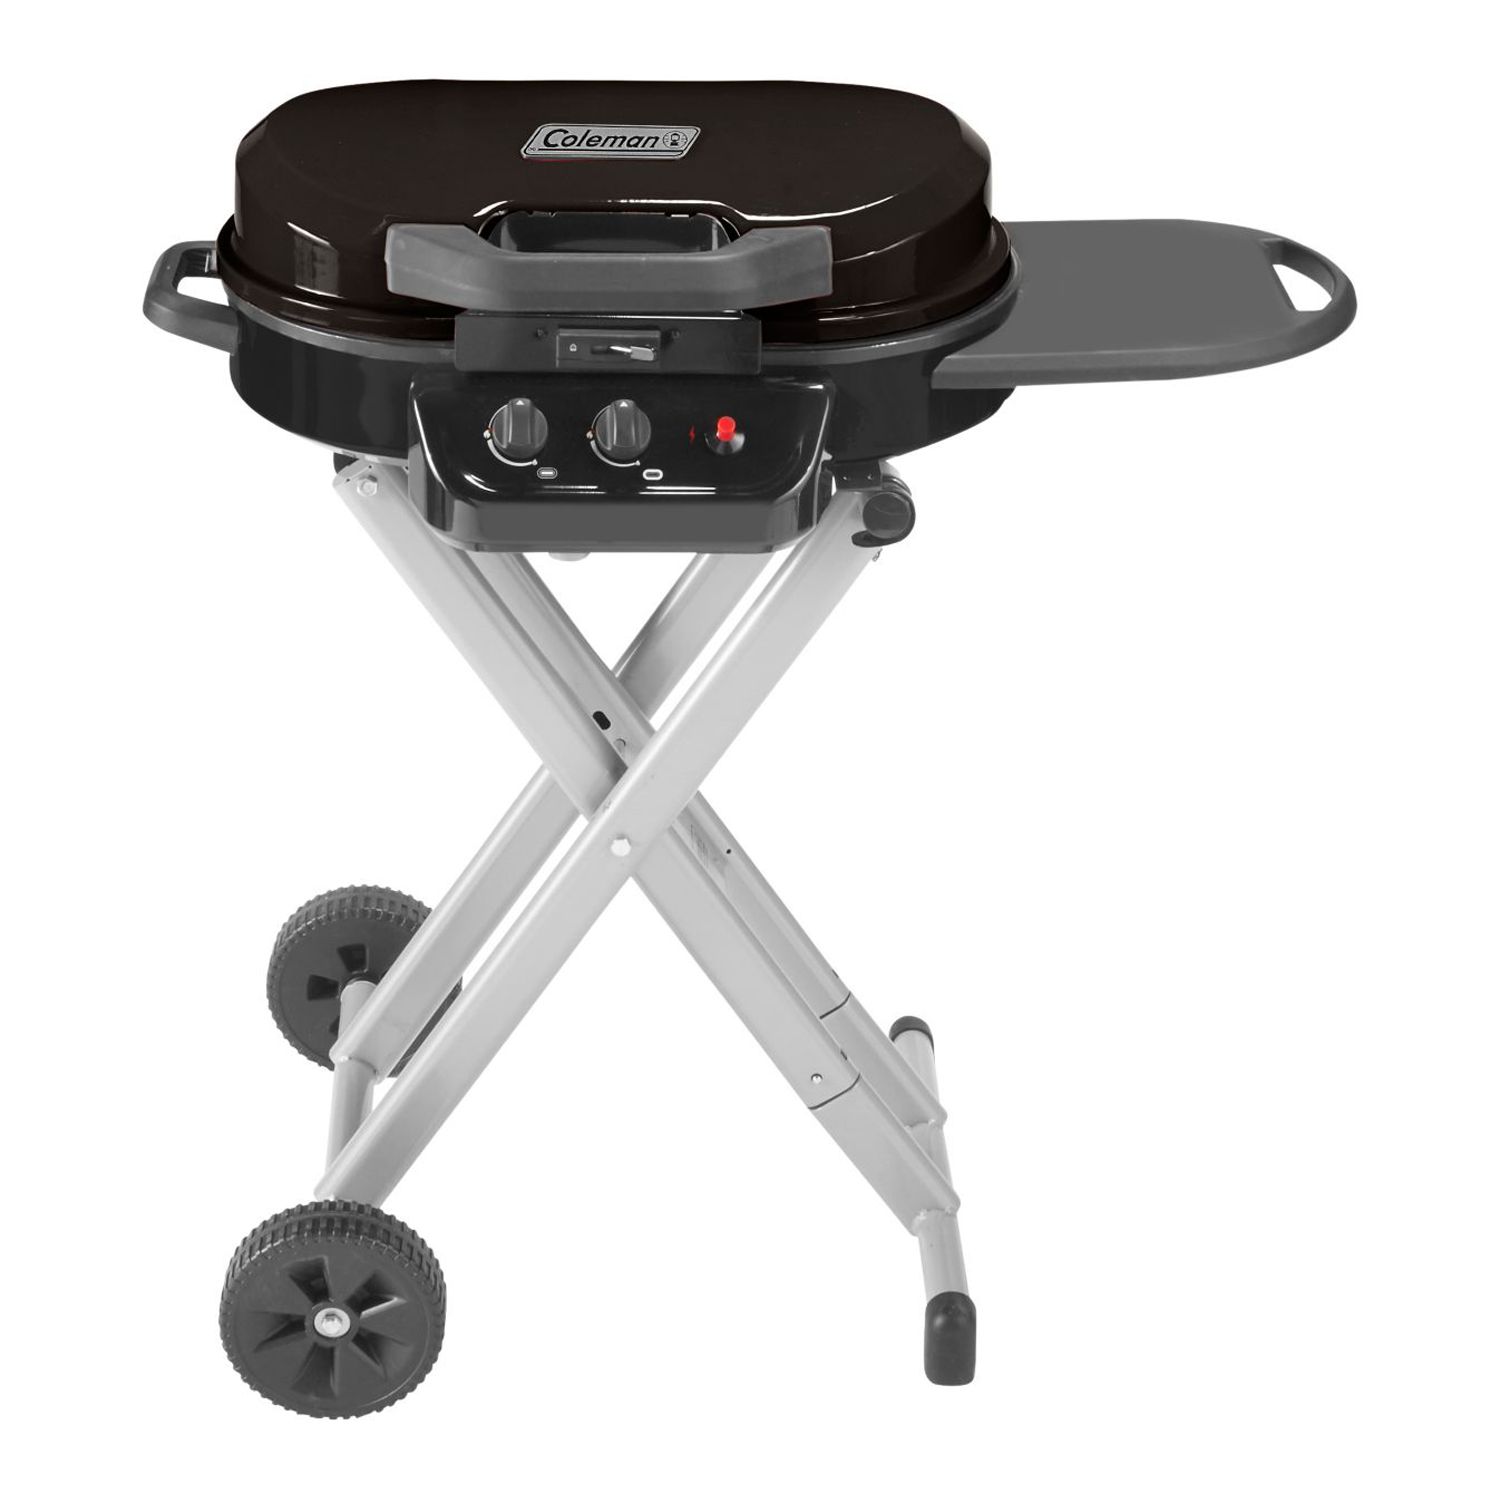 Outsunny 2 Burner Propane GAS Grill Outdoor Portable Tabletop BBQ with Foldable Legs, Lid, Thermometer for Camping, Picnic, Backyard, Light Grey